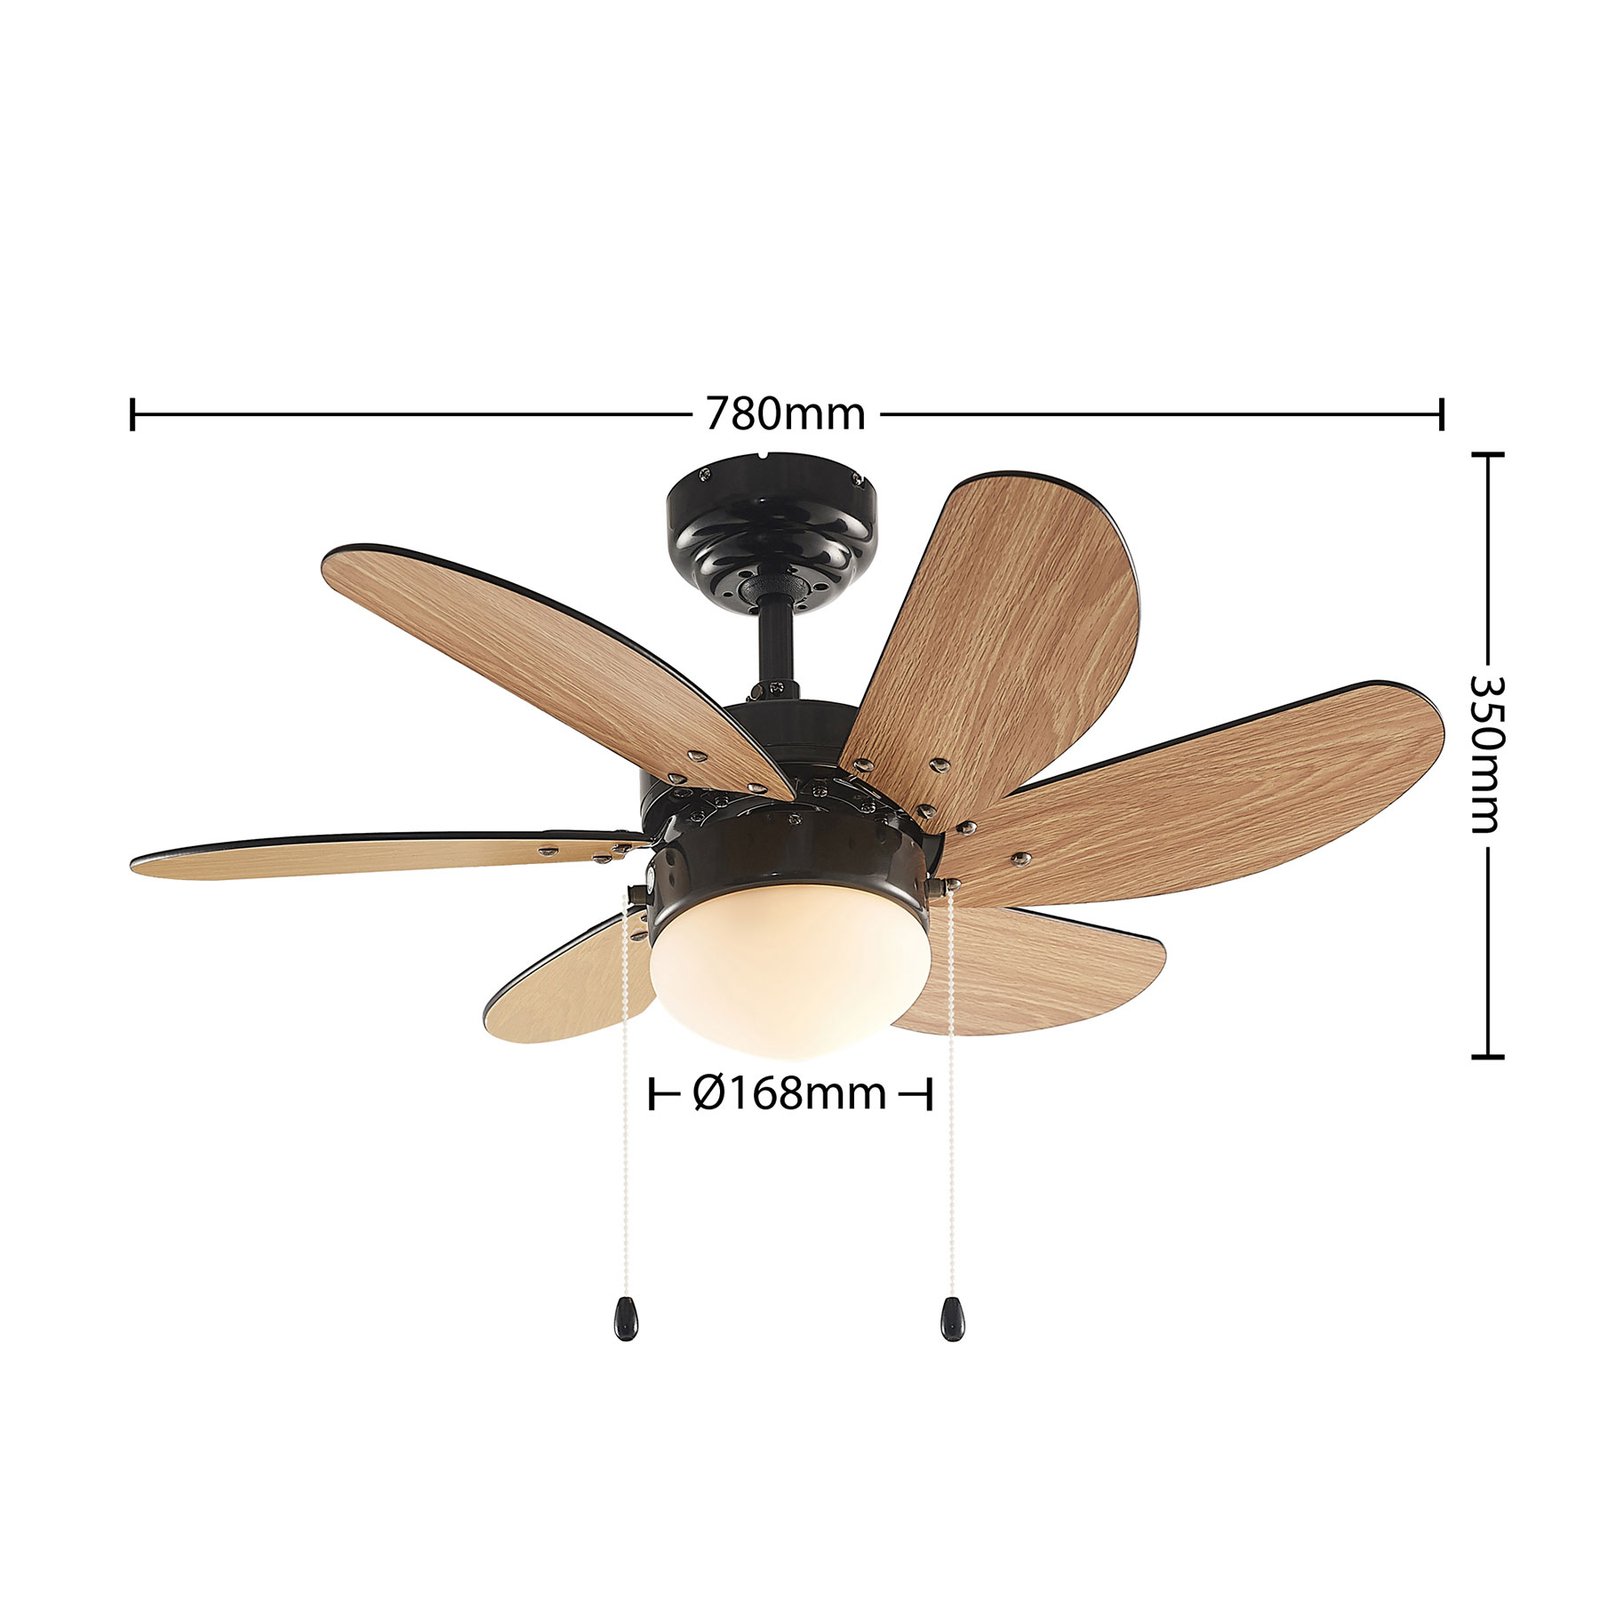 Lindby ceiling fan with light Minja black quiet 78 cm